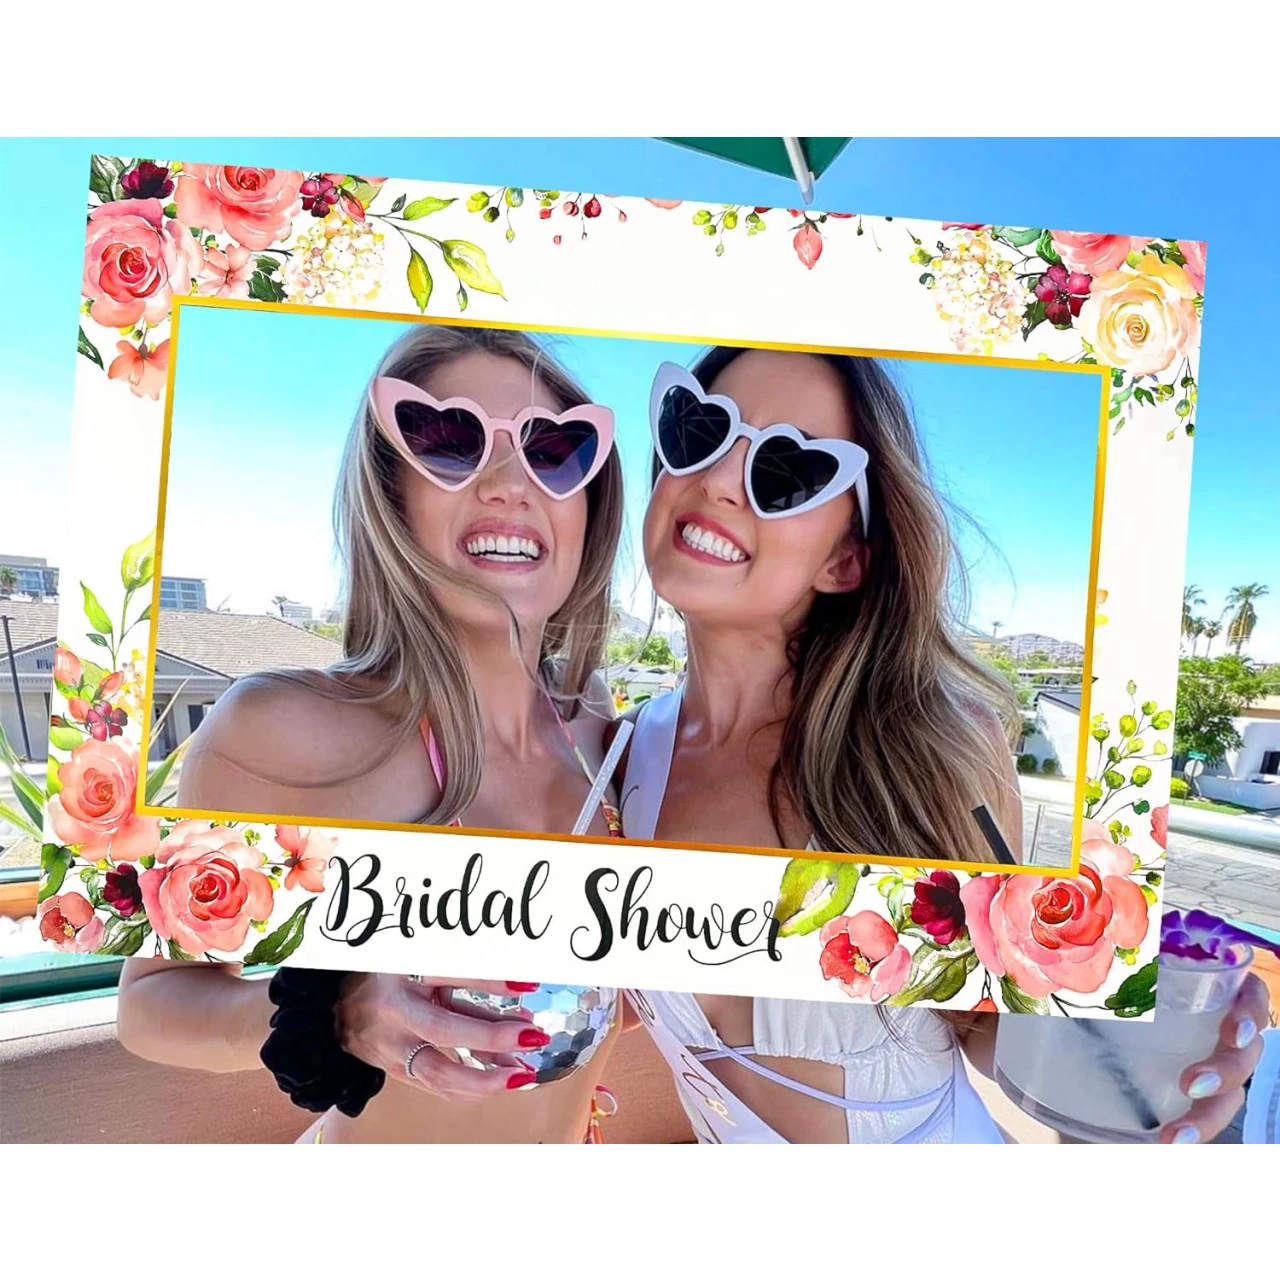 JeVenis Floral Bridal Shower Photo Booth Props